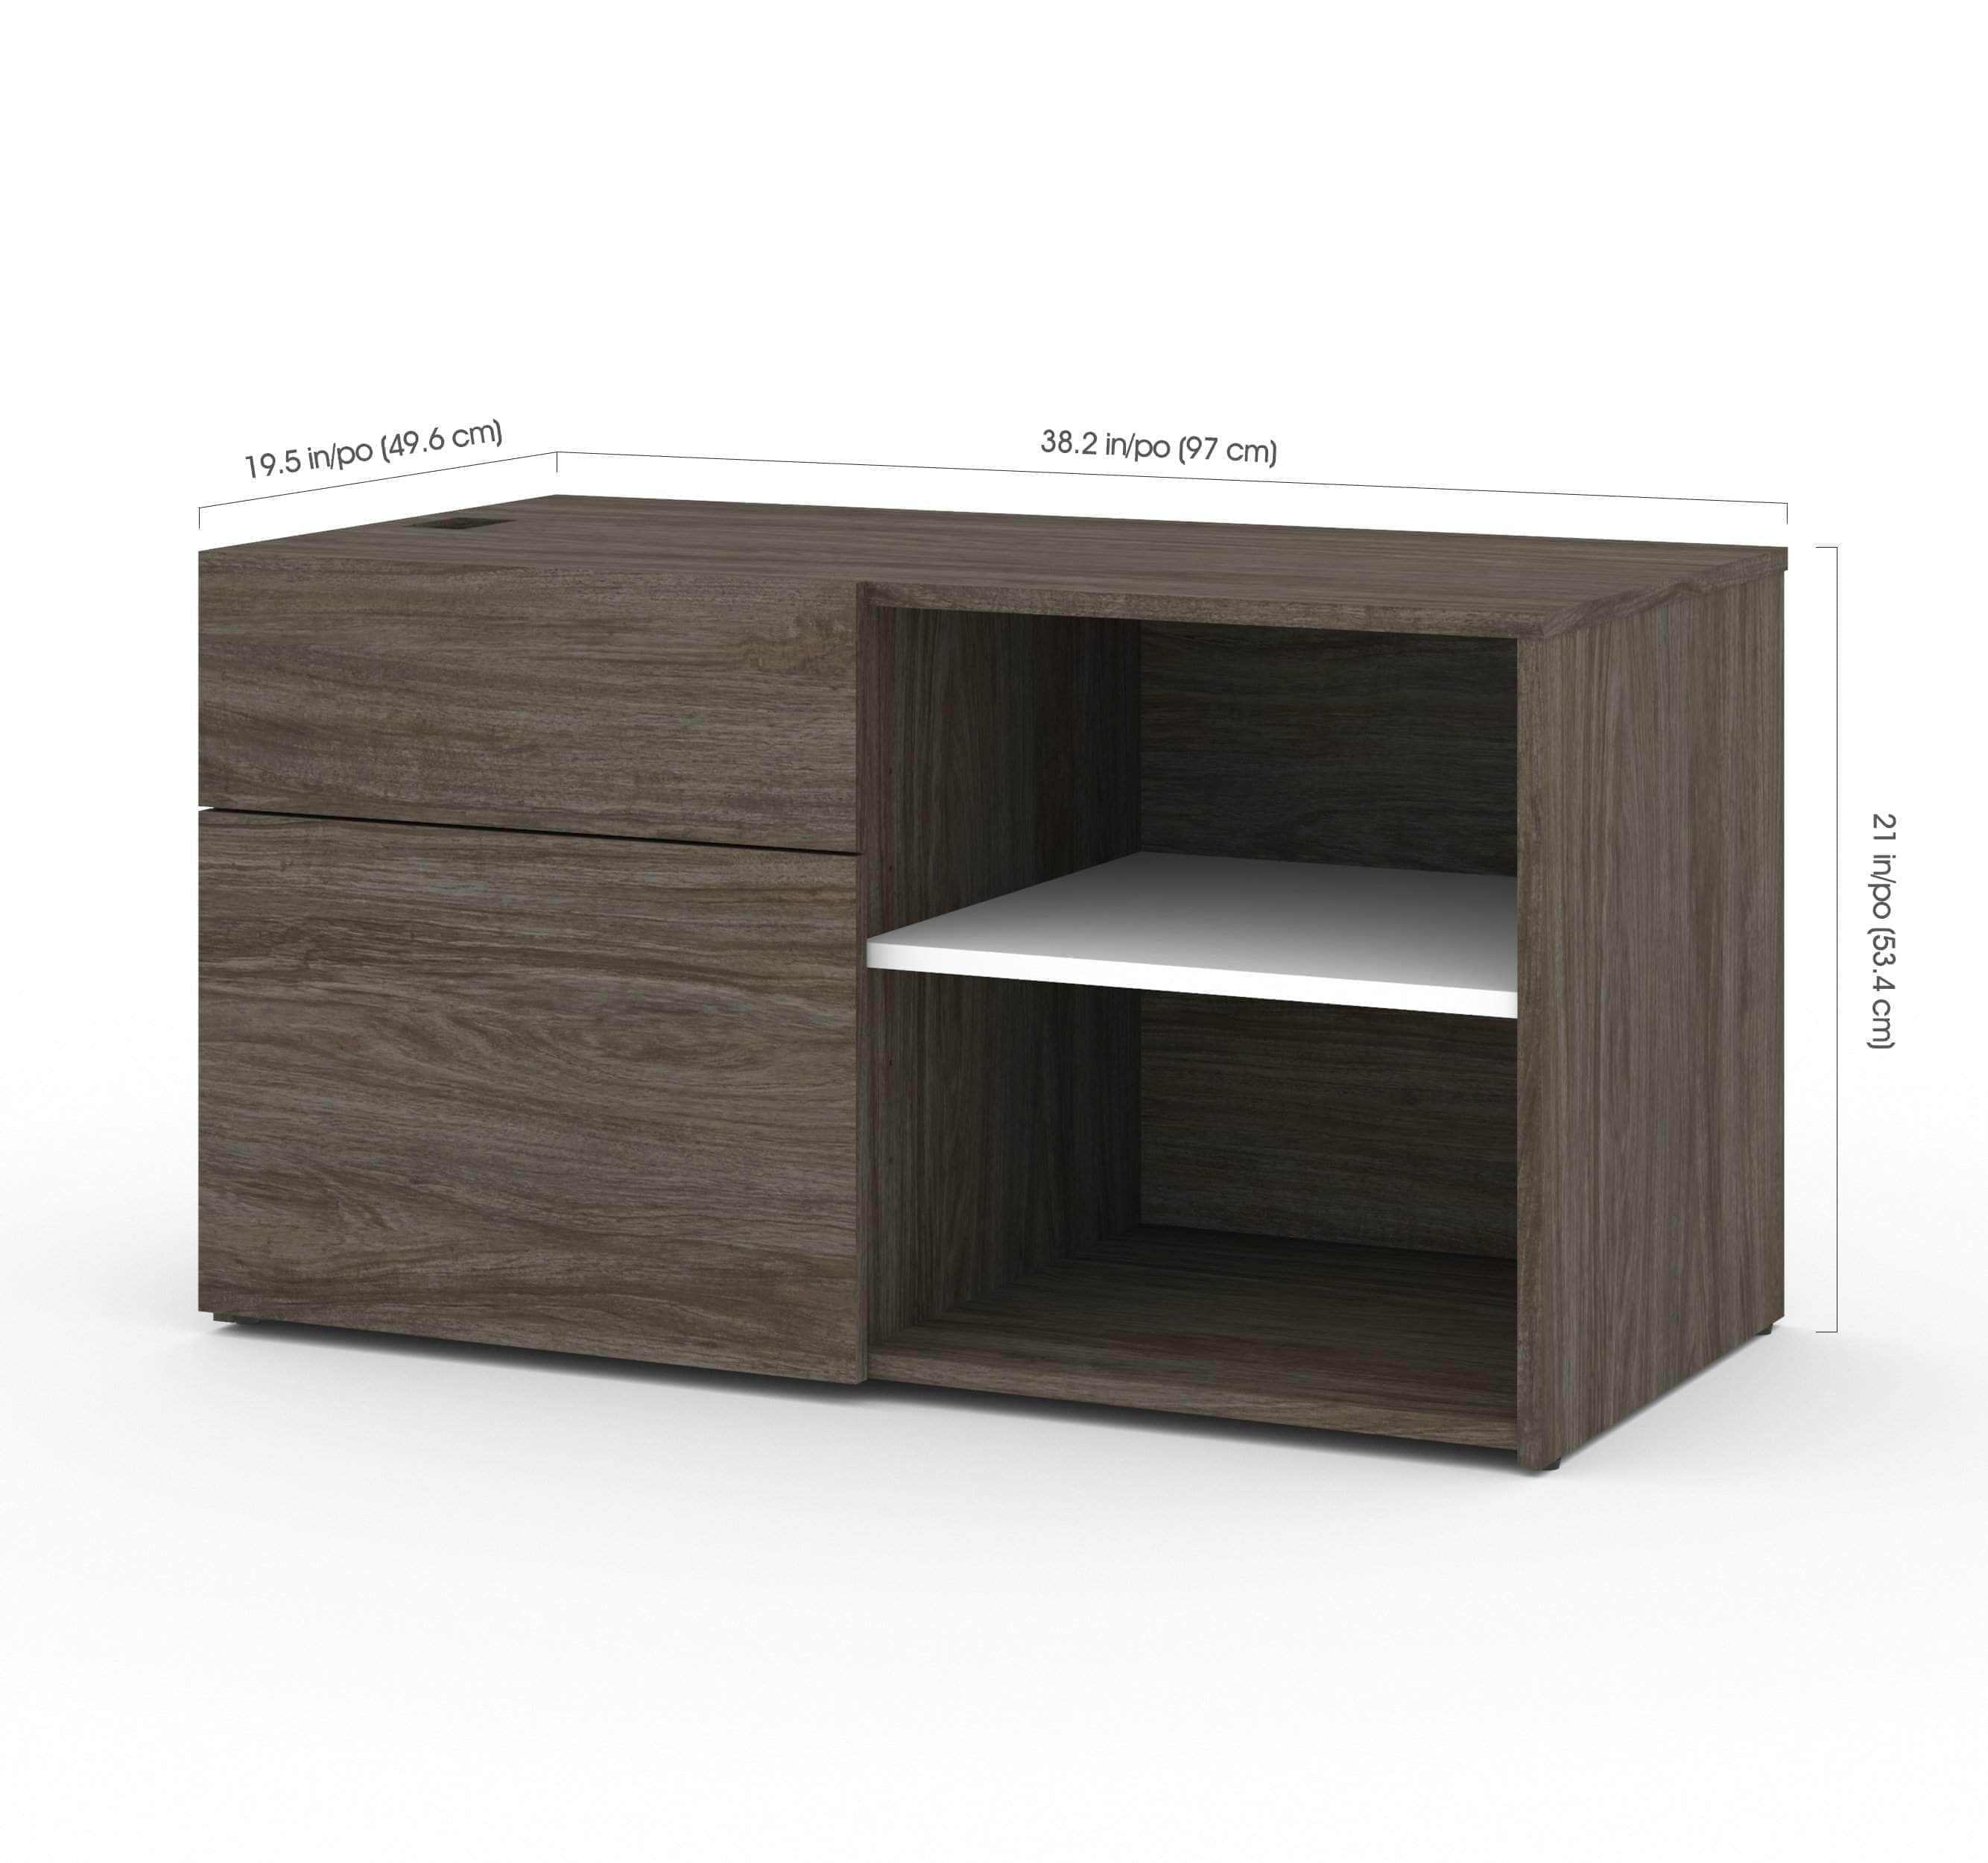 Modubox Desk Viva 2-Piece Set Including an L-Shaped Standing Desk and a Credenza - Available in 2 Colours